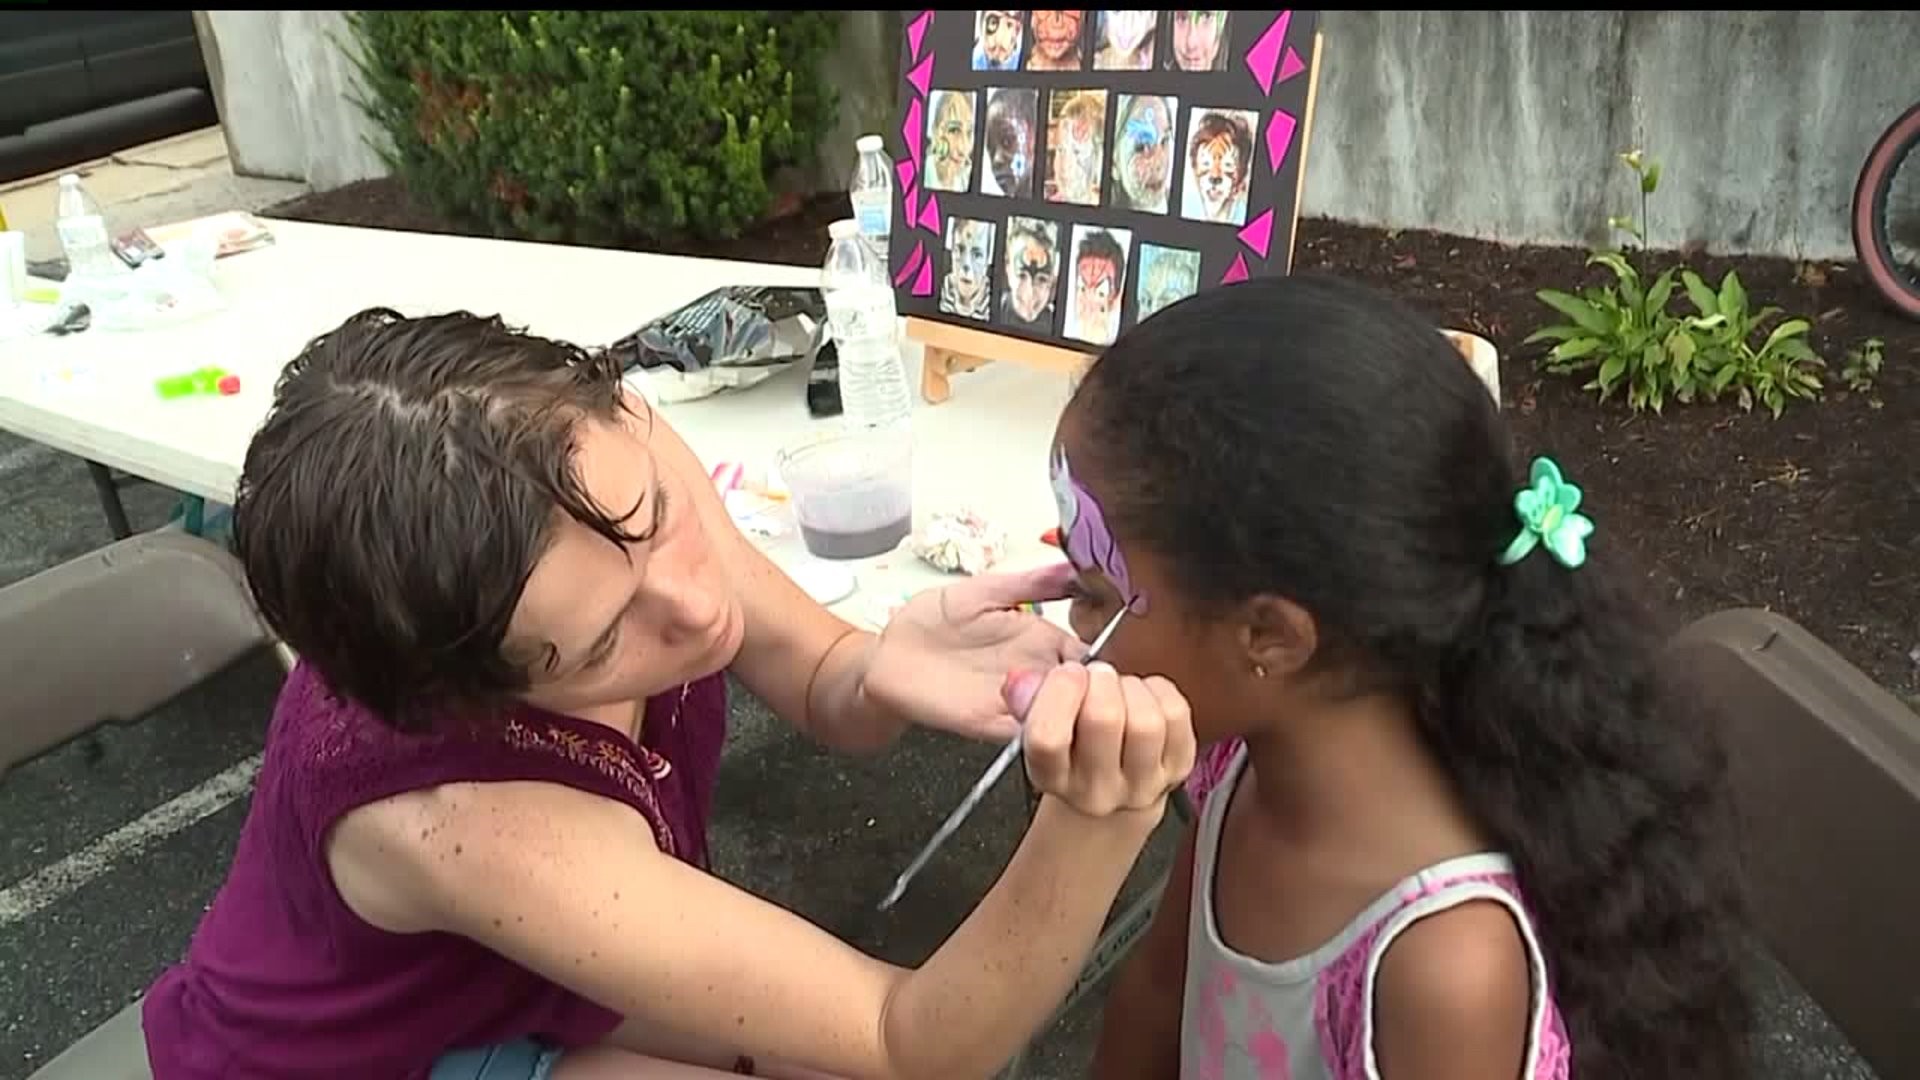 Communities celebrate "National Night Out"